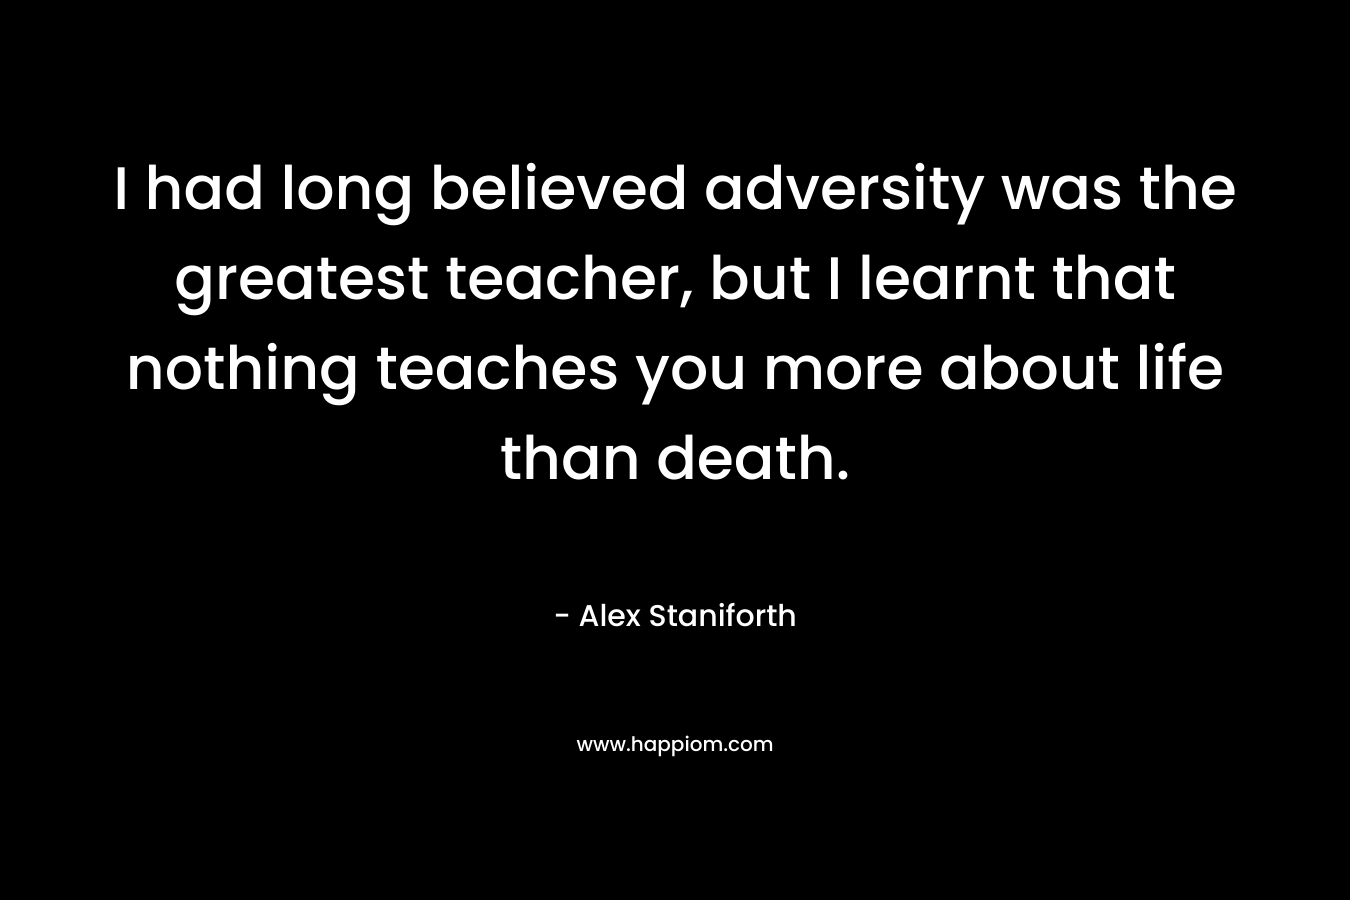 I had long believed adversity was the greatest teacher, but I learnt that nothing teaches you more about life than death. – Alex Staniforth